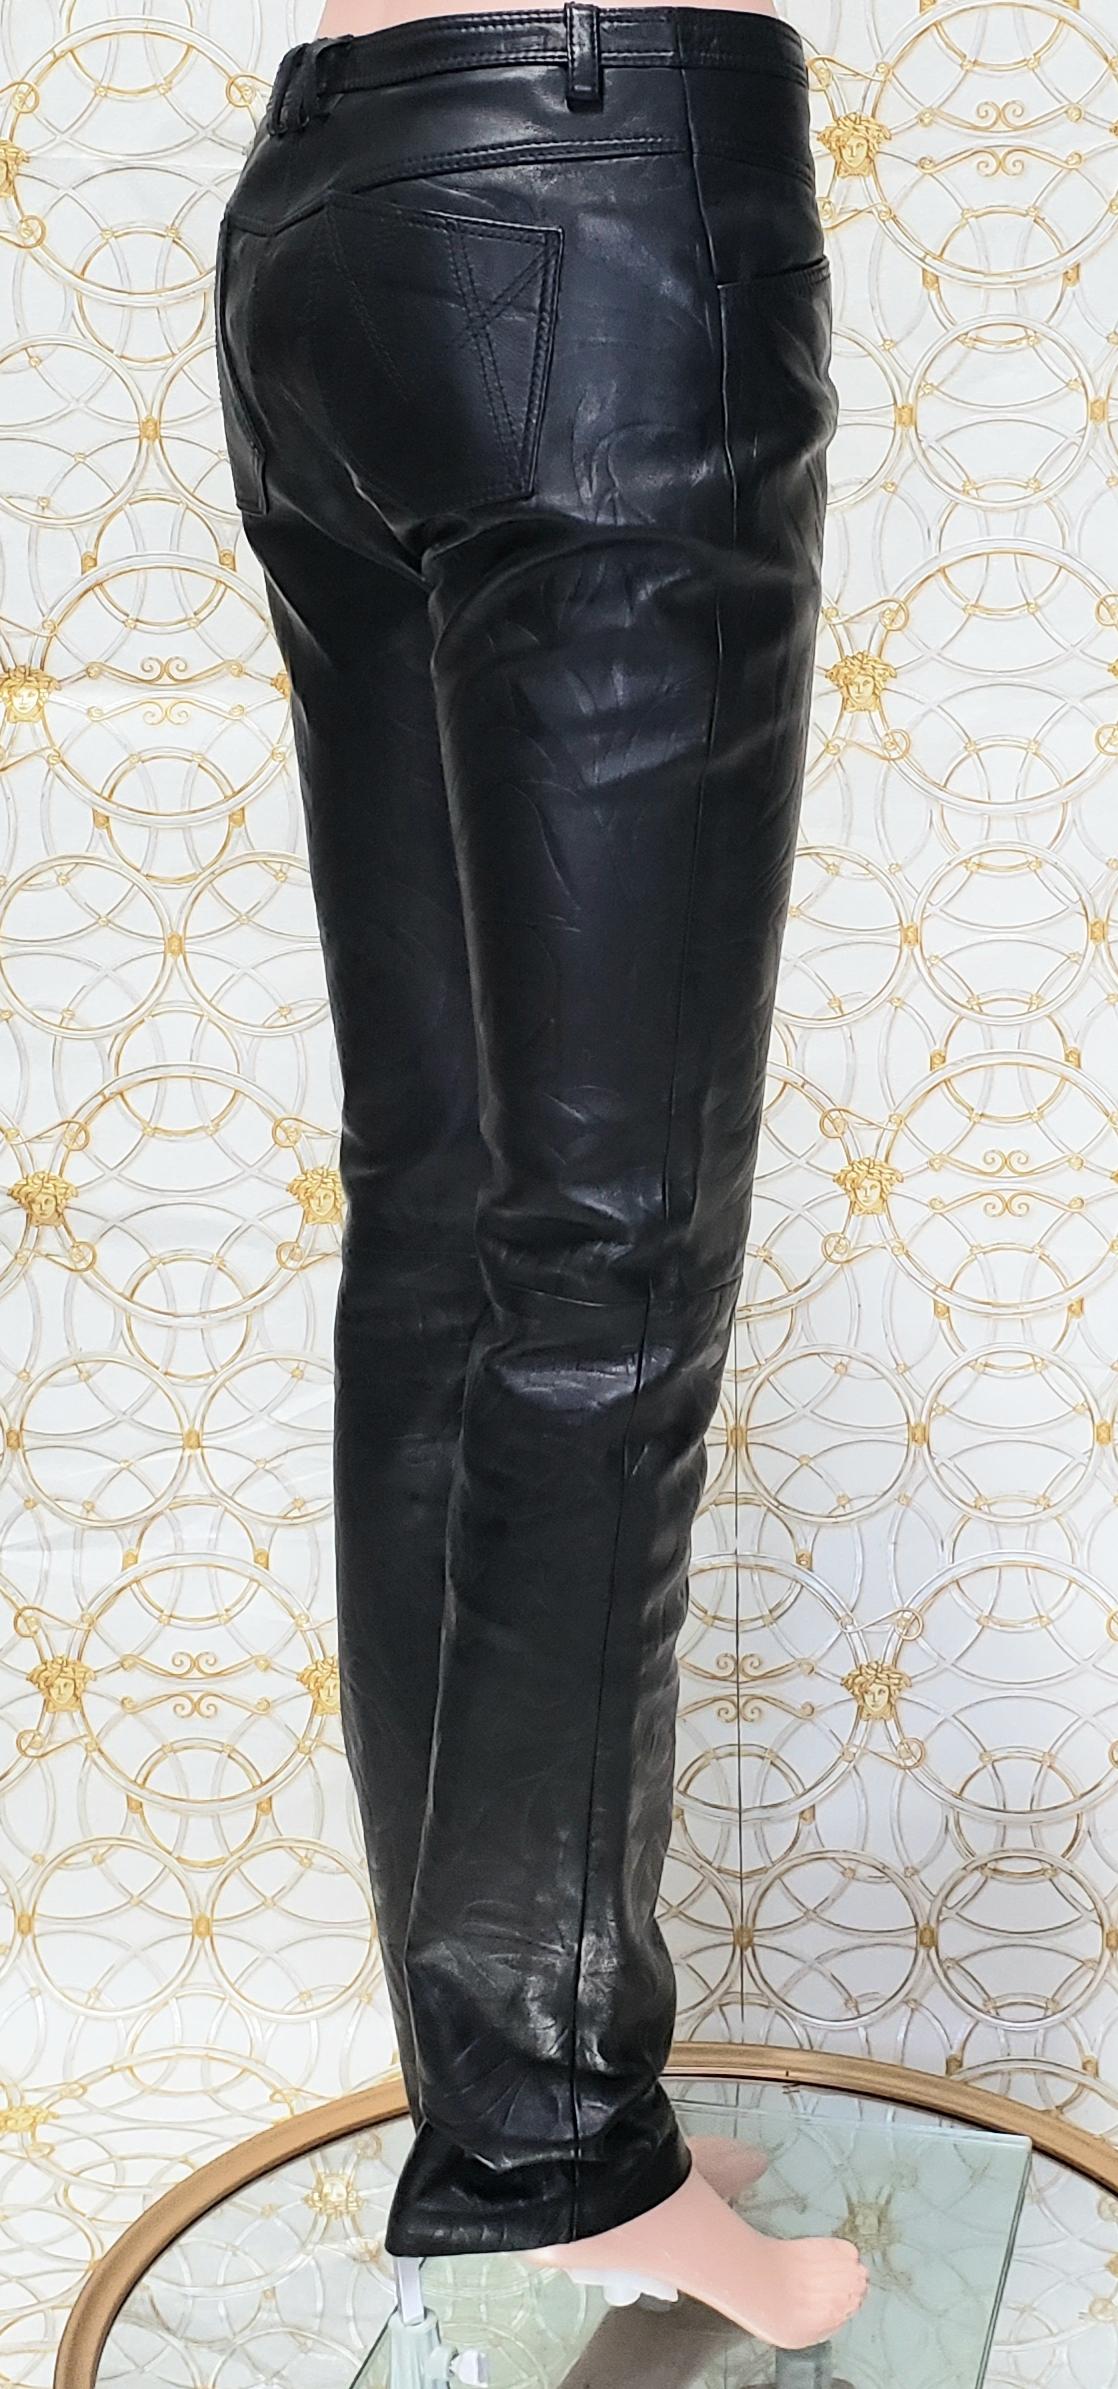 Women's S/S 2014 Look # 35 VERSACE BLACK LEATHER FLORAL PRINT PANTS size 38 - 2 For Sale